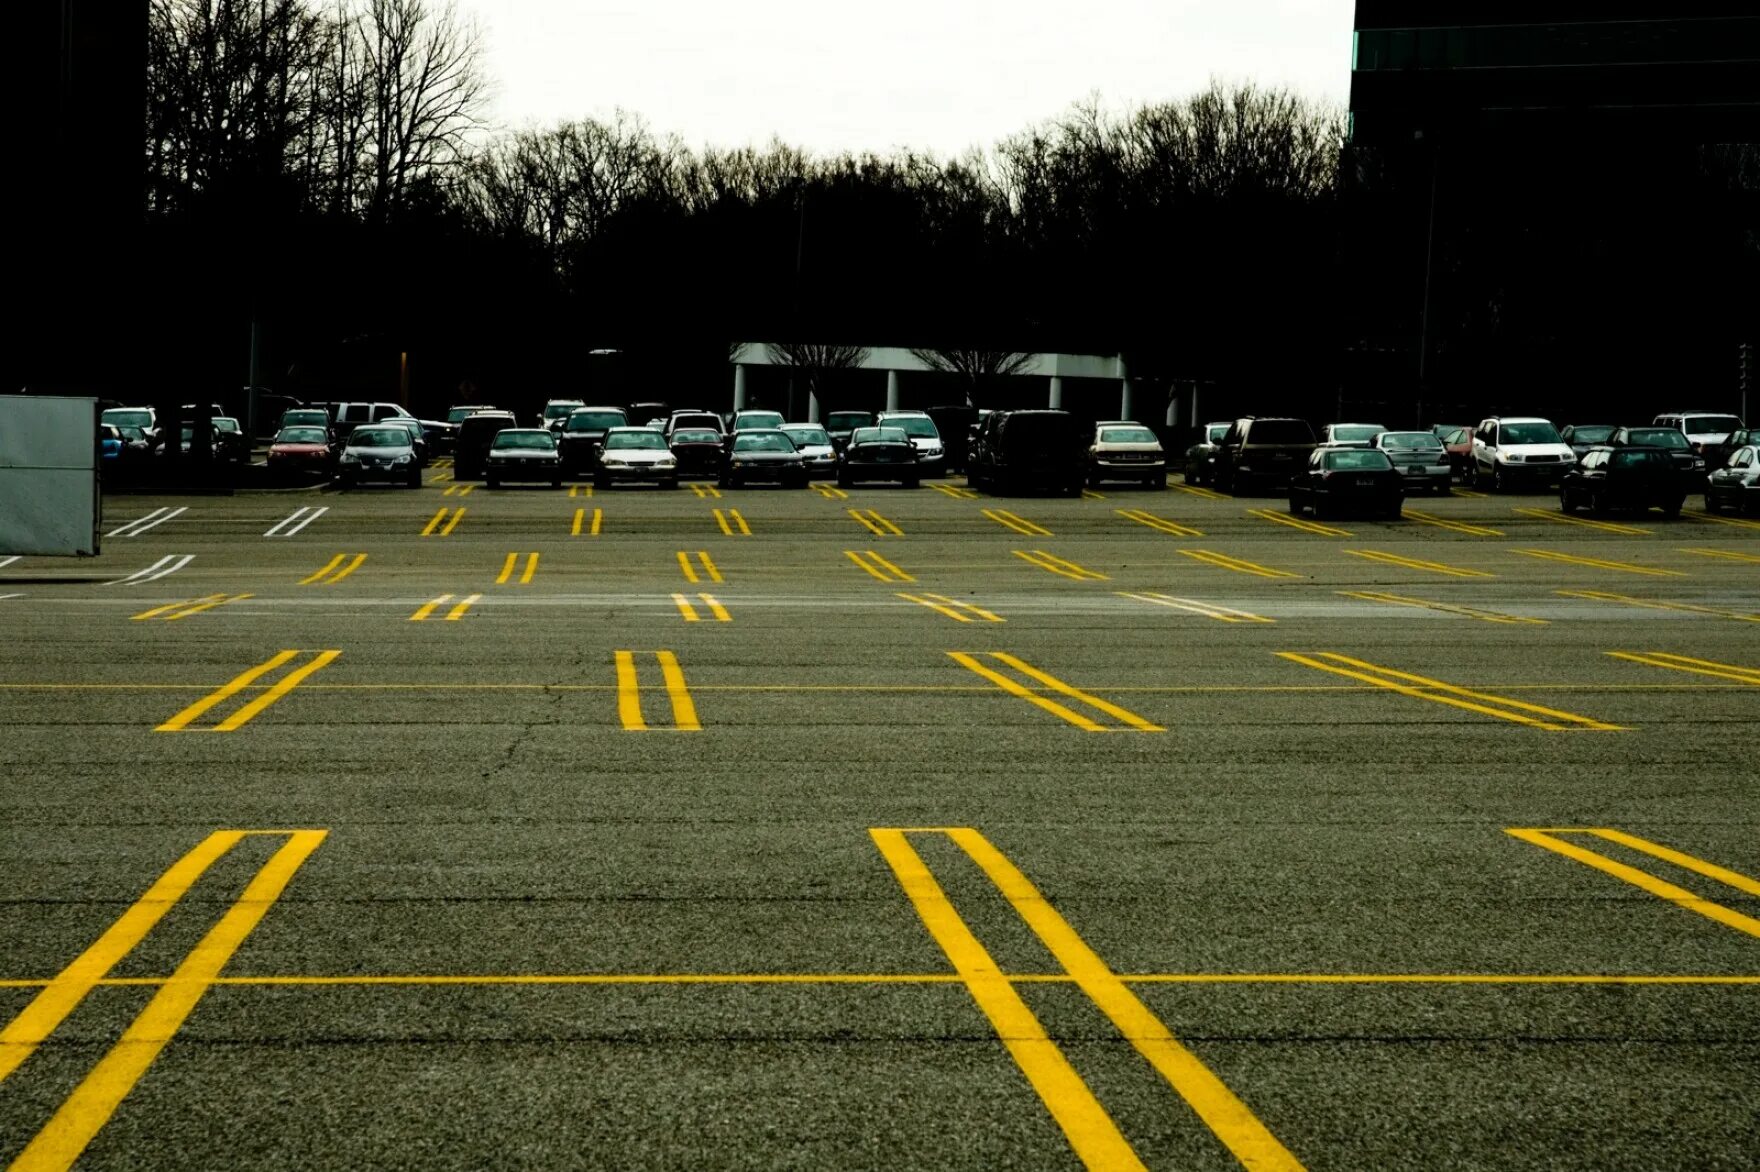 The lot of drive. Parking. Parking Station. Parking lots. Driving in the parking lot.